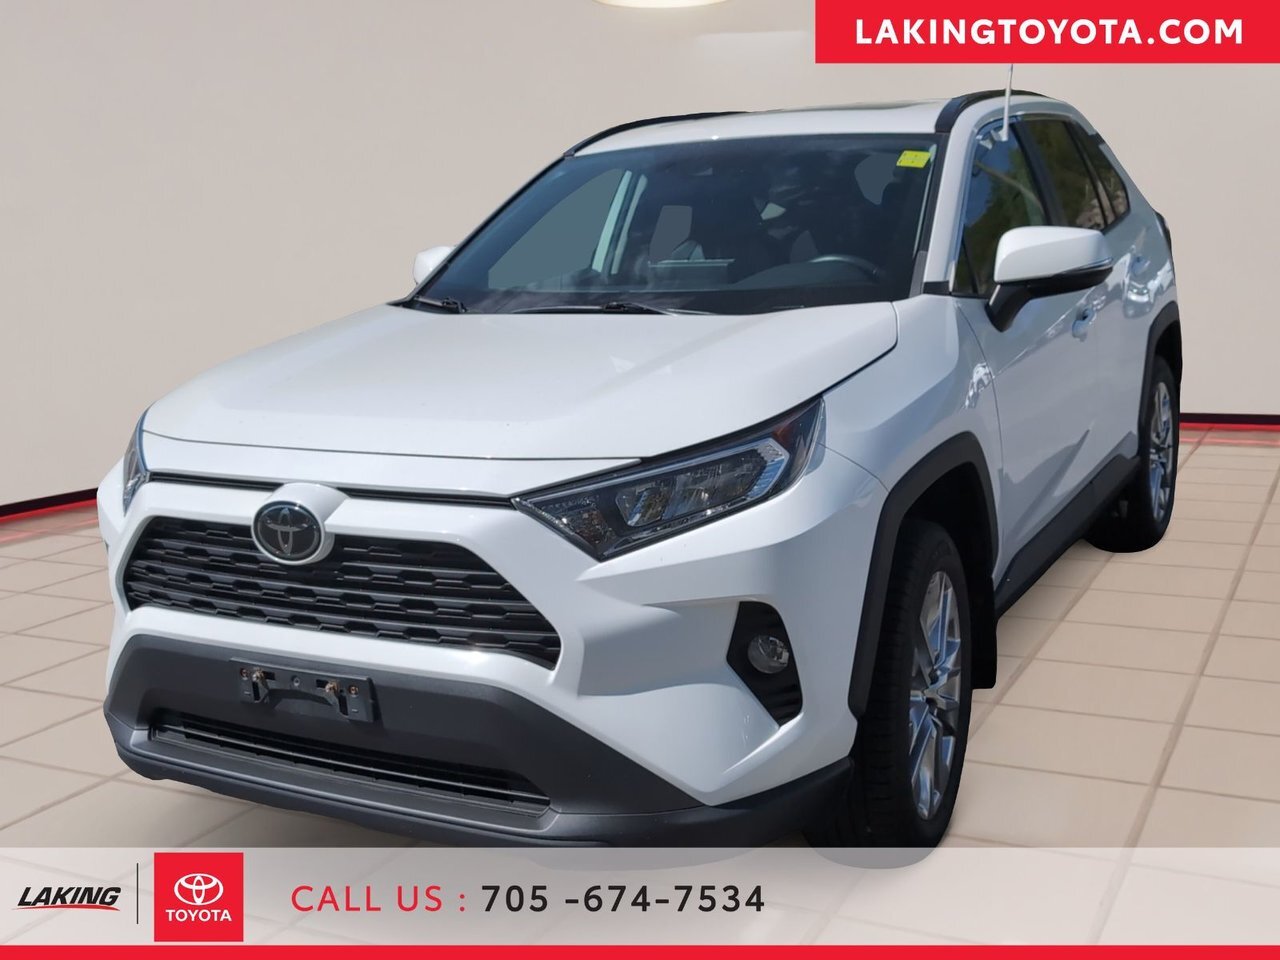 2019 Toyota RAV4 XLE All Wheel Drive This Toyota Hybrid delivers wh